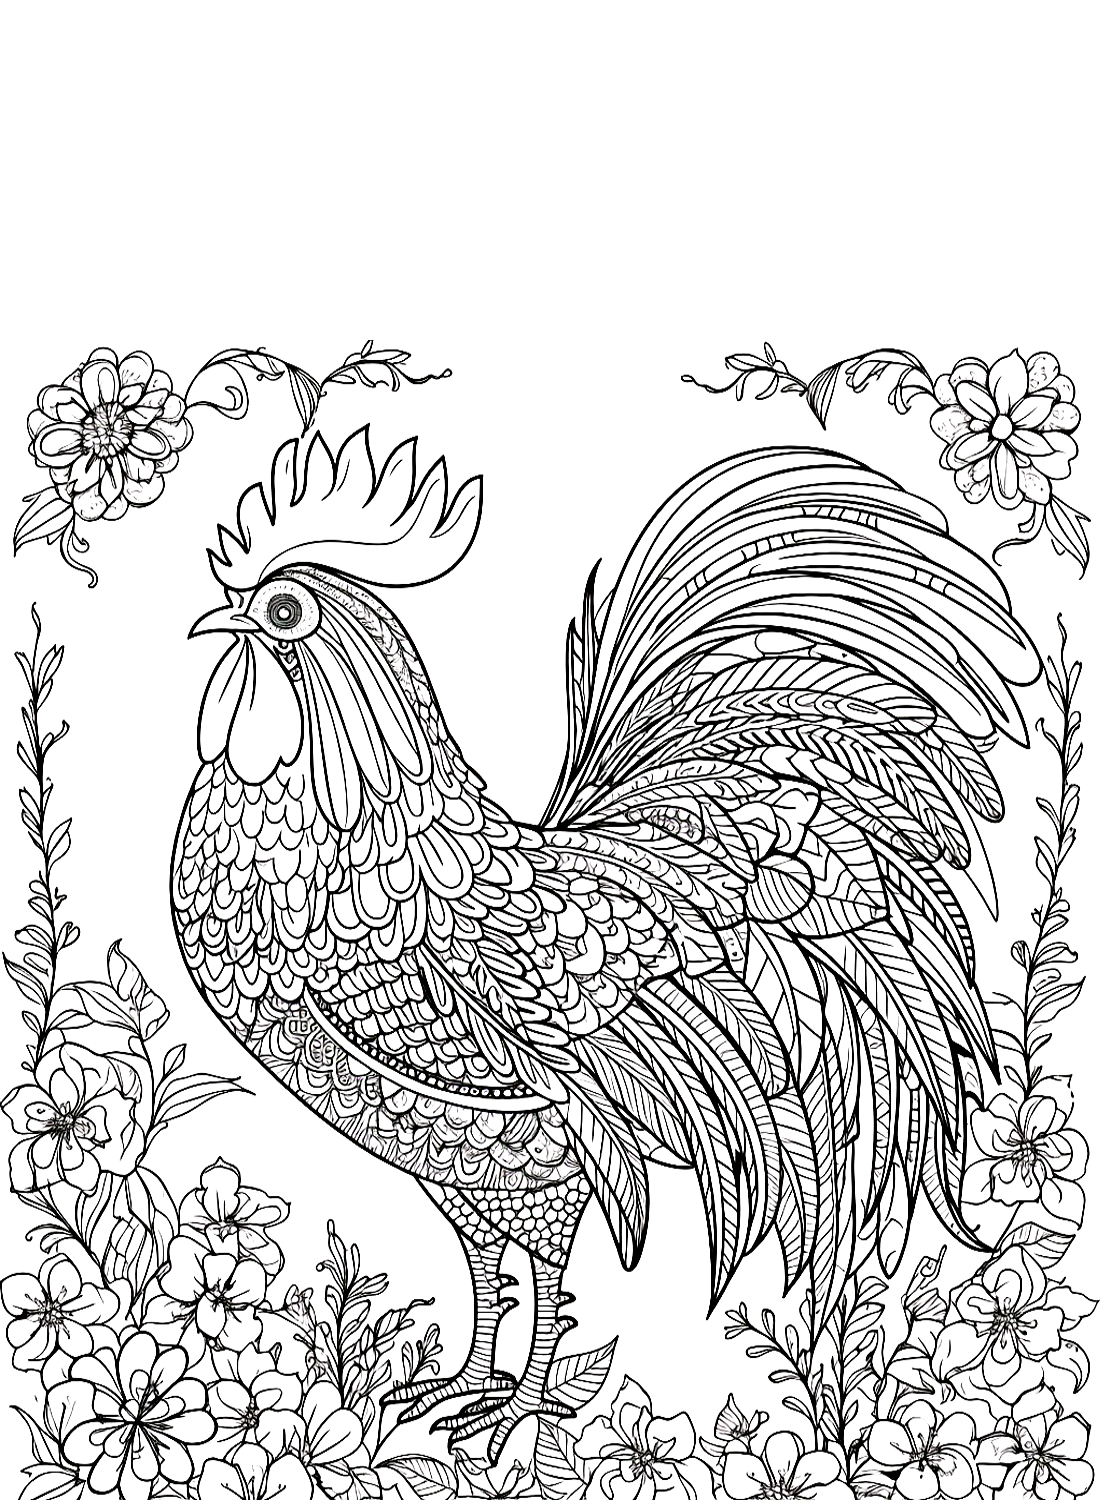 A rooster and the garden Coloring Pages